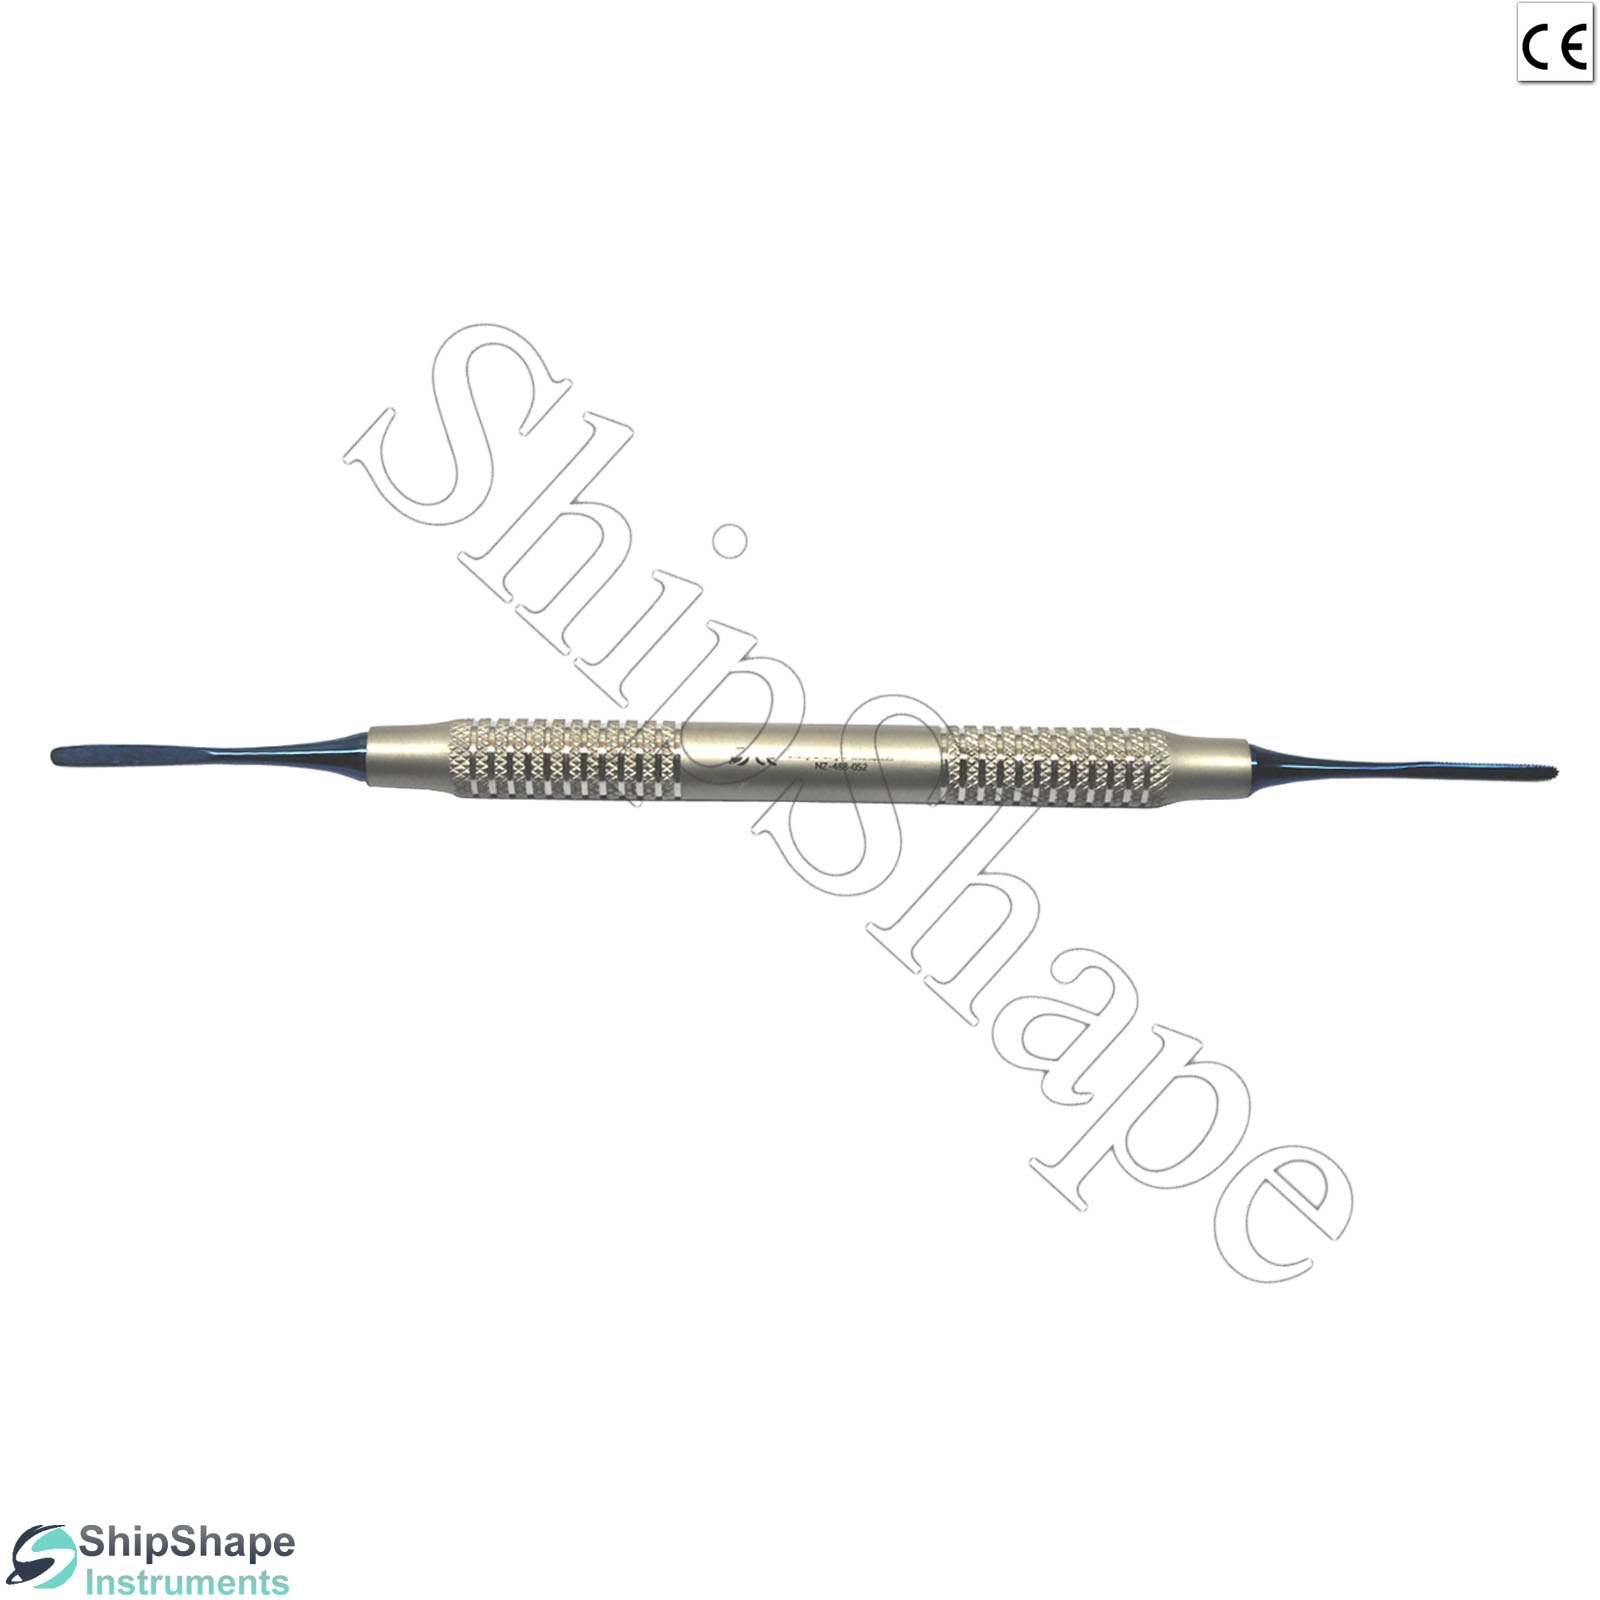 Periotomes Implant Placement Titanium-Coated PDL Micro Serrated Tps Dental Instruments-774